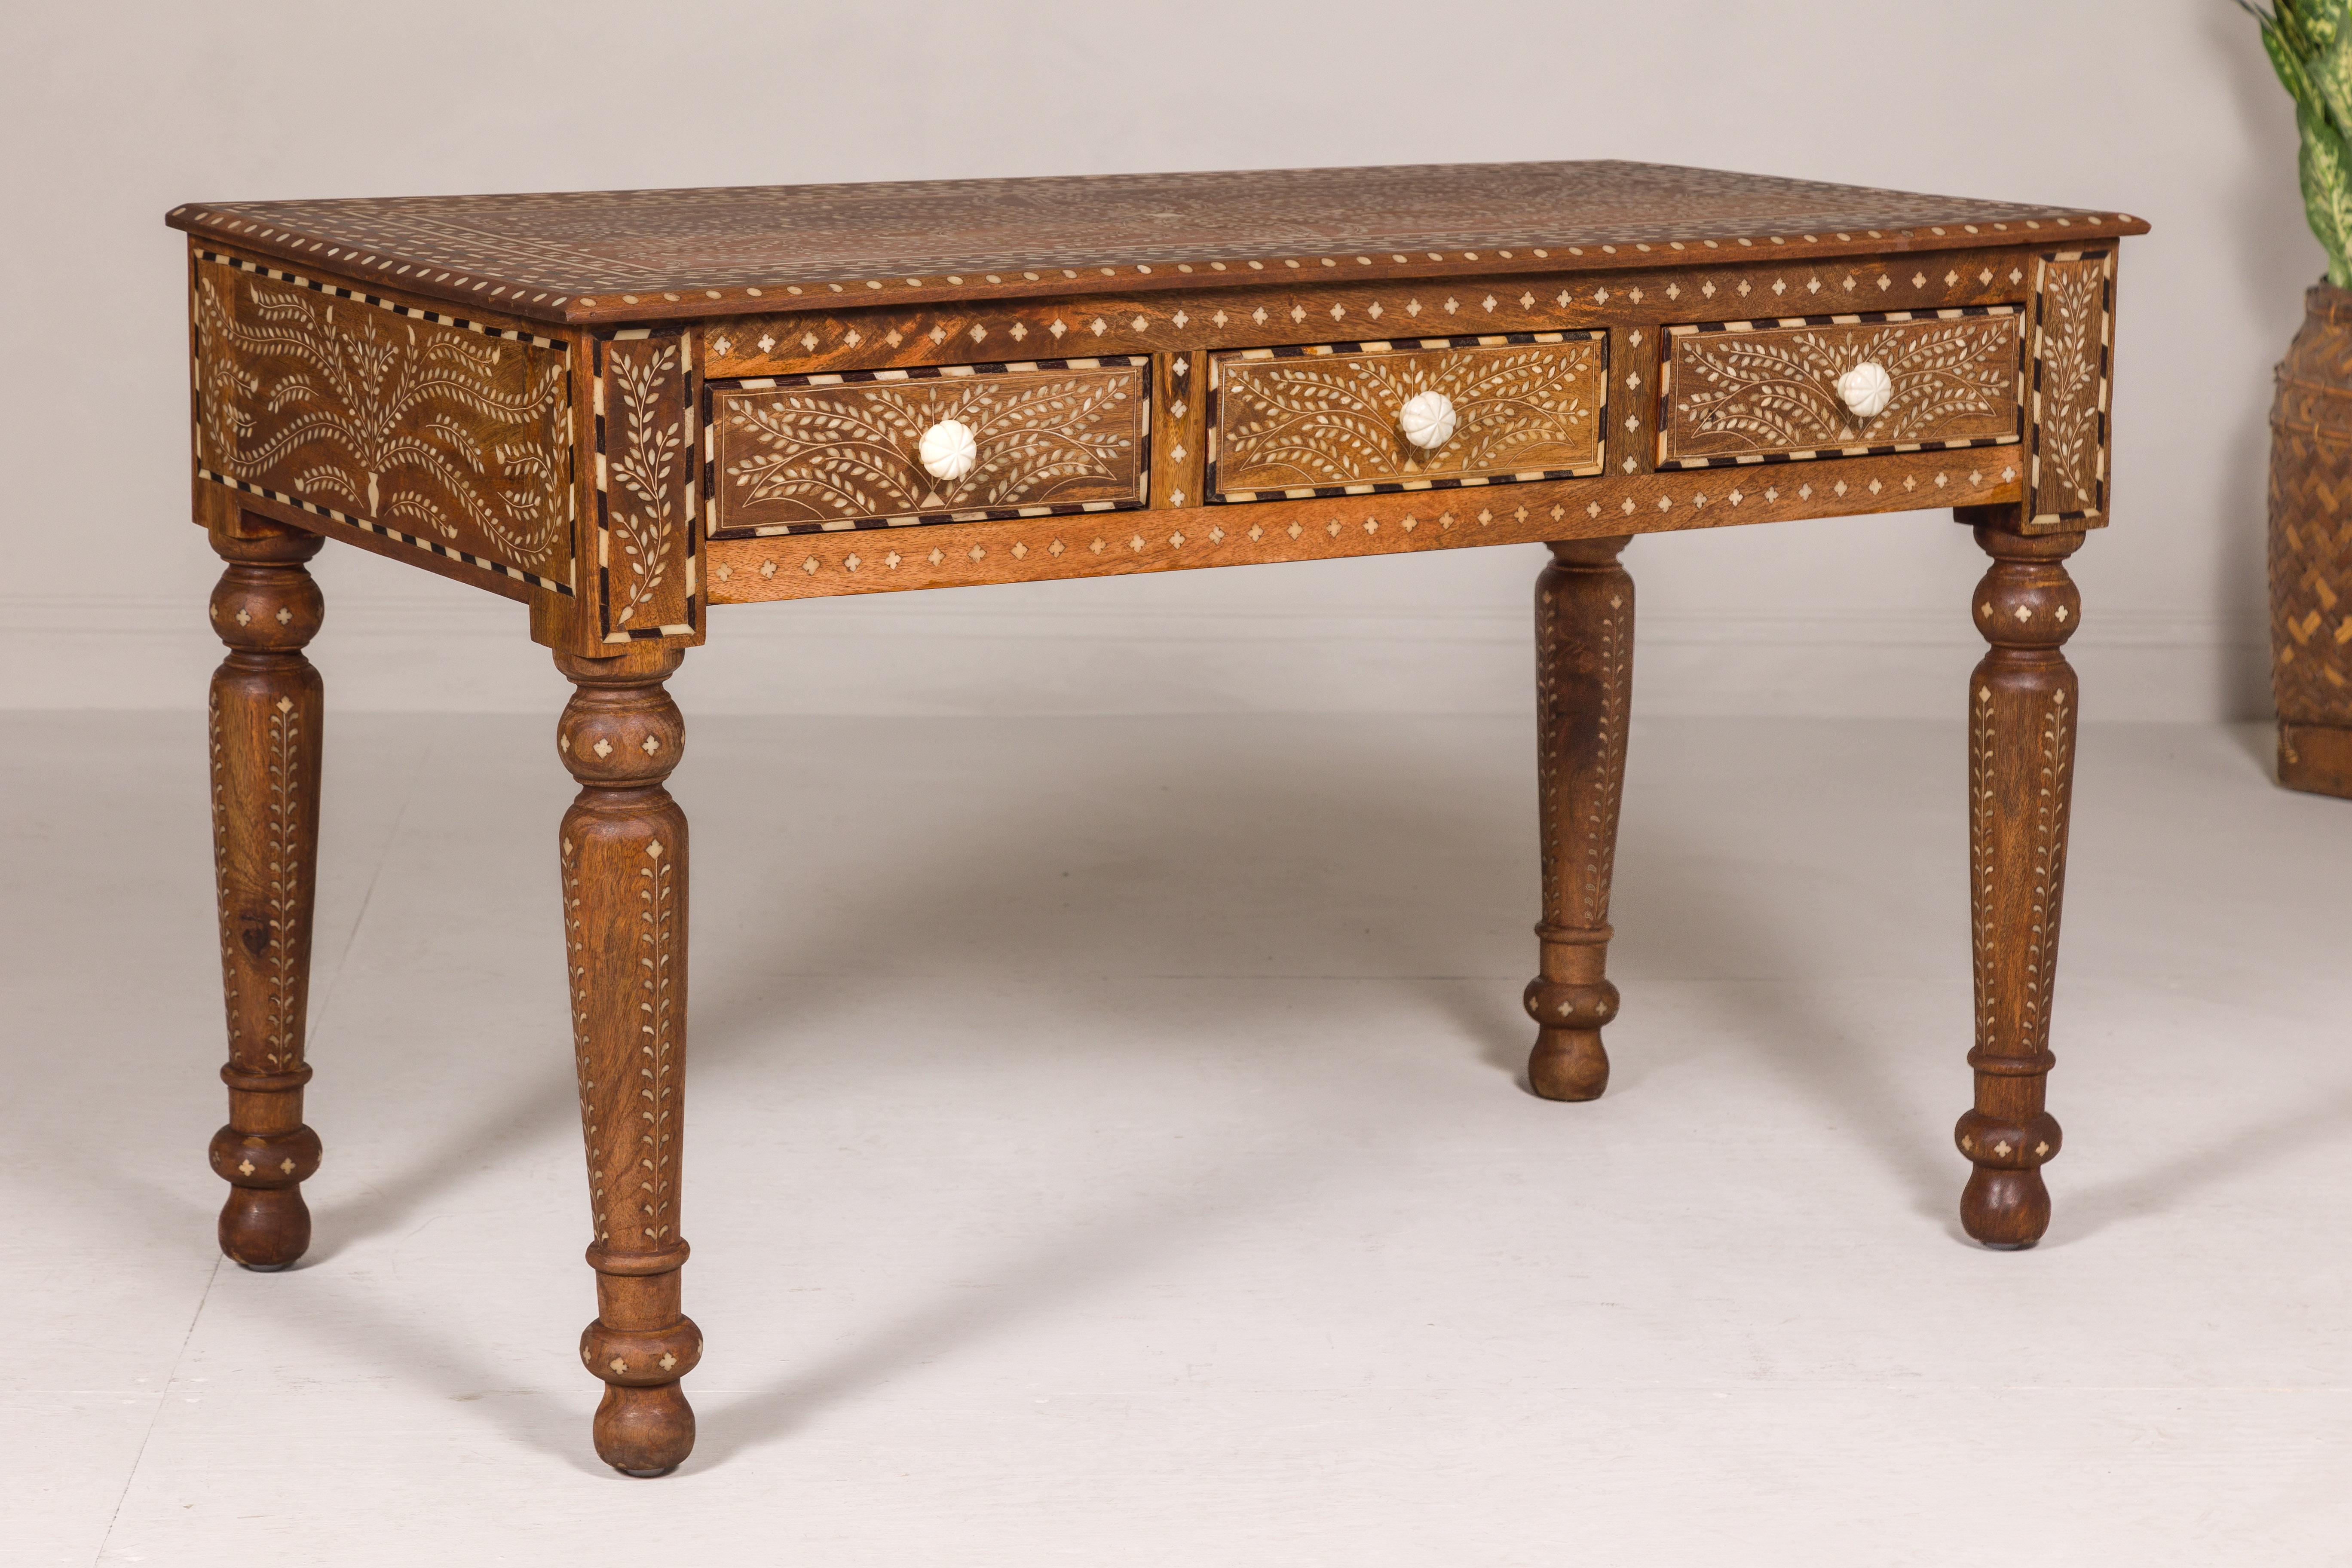 Anglo Indian Style Mango Wood Console or Desk with Three Drawers and Bone Inlay For Sale 4